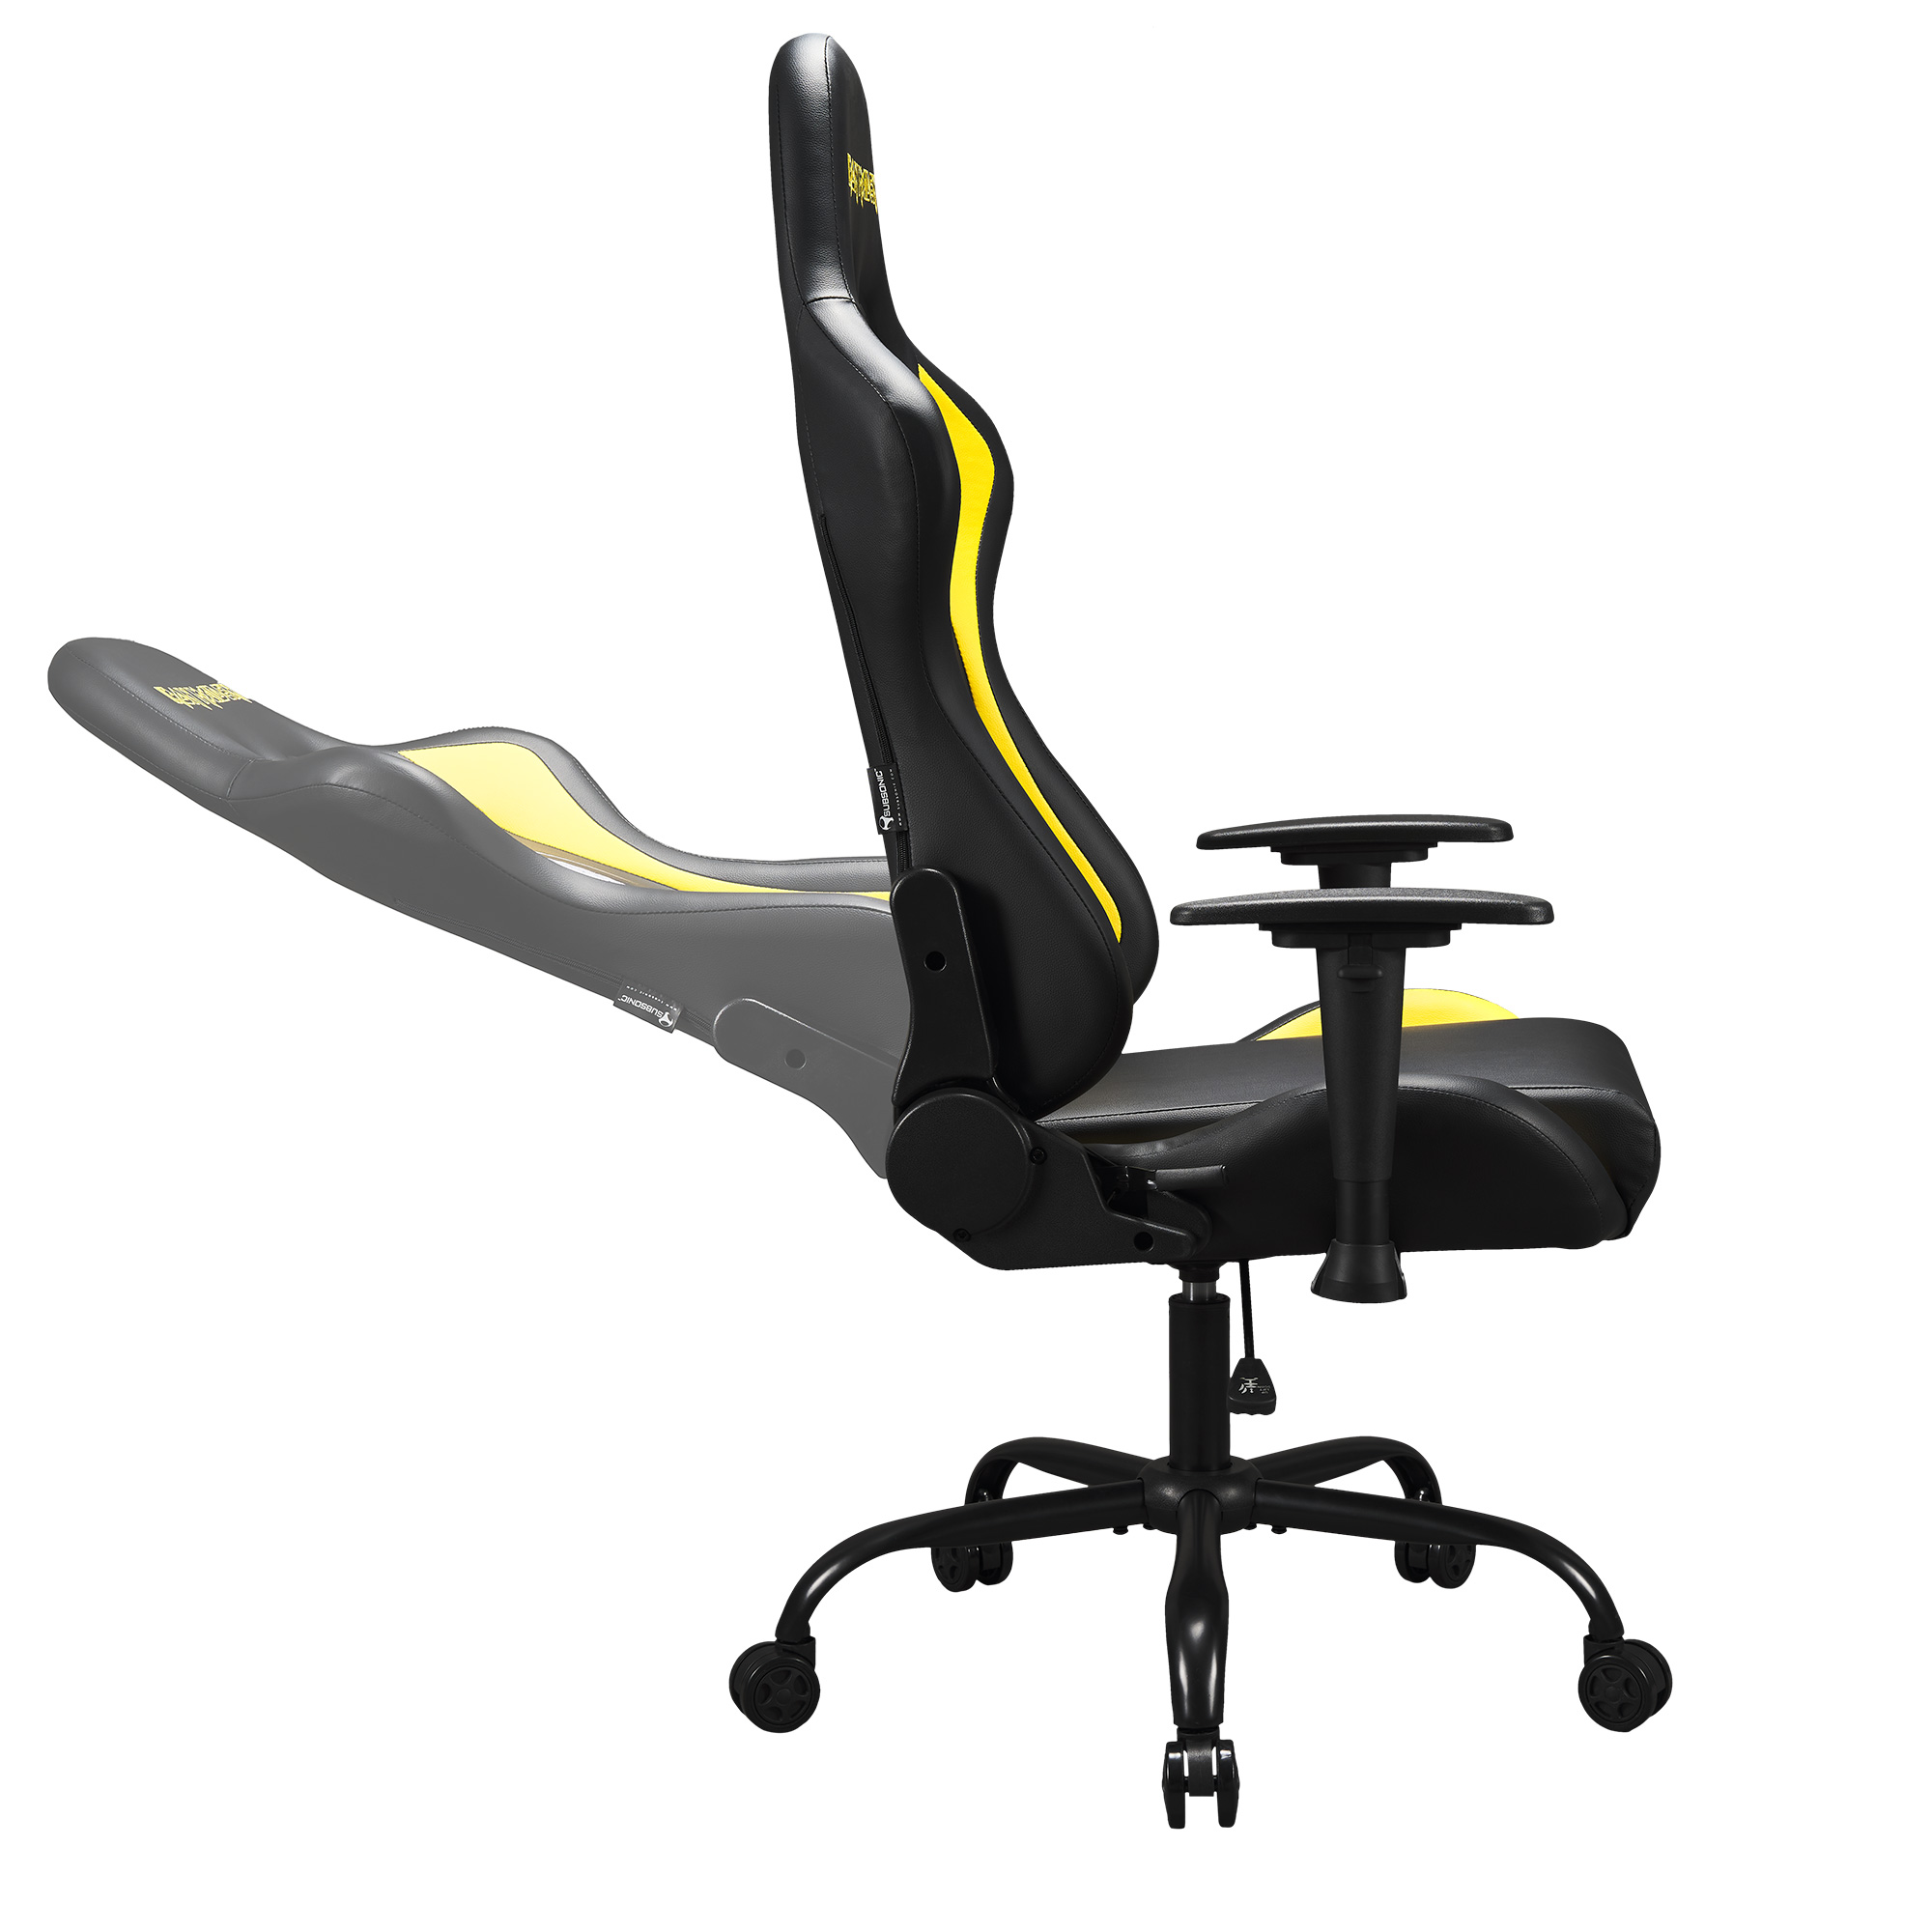 Iron Maiden Killers Adult Gamer Seat | Subsonic